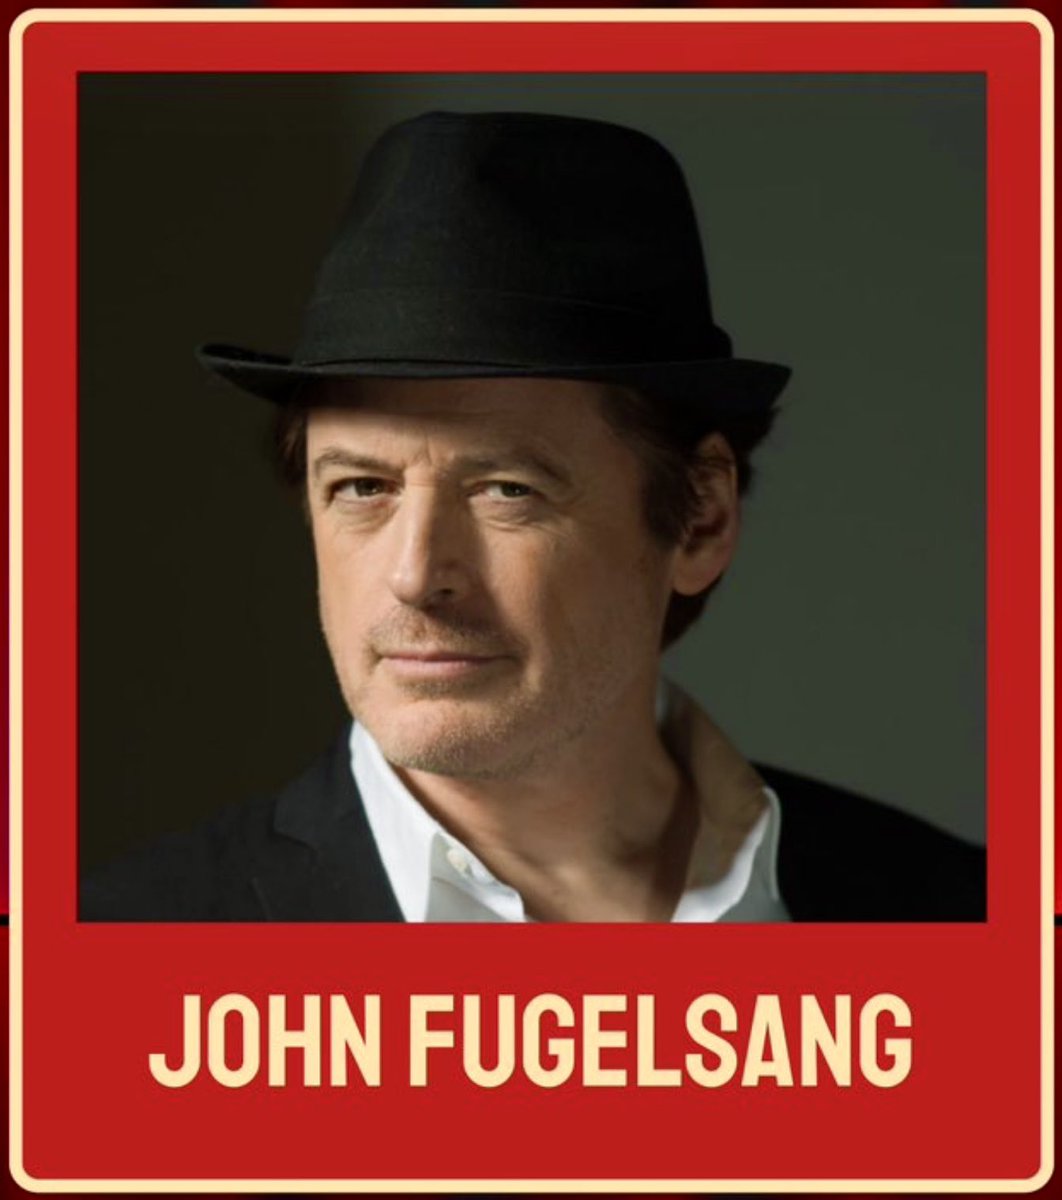 Two of the best together tonight @ComedyDaddy #KeithPrice and @JohnFugelsang @SiriusXMProg #TellMeEverything 3rd Hour of John’s #TME Ch 127, M-F  9PM ET on @SIRIUSXM.  They are “so good so good so good.” 👏👍👏